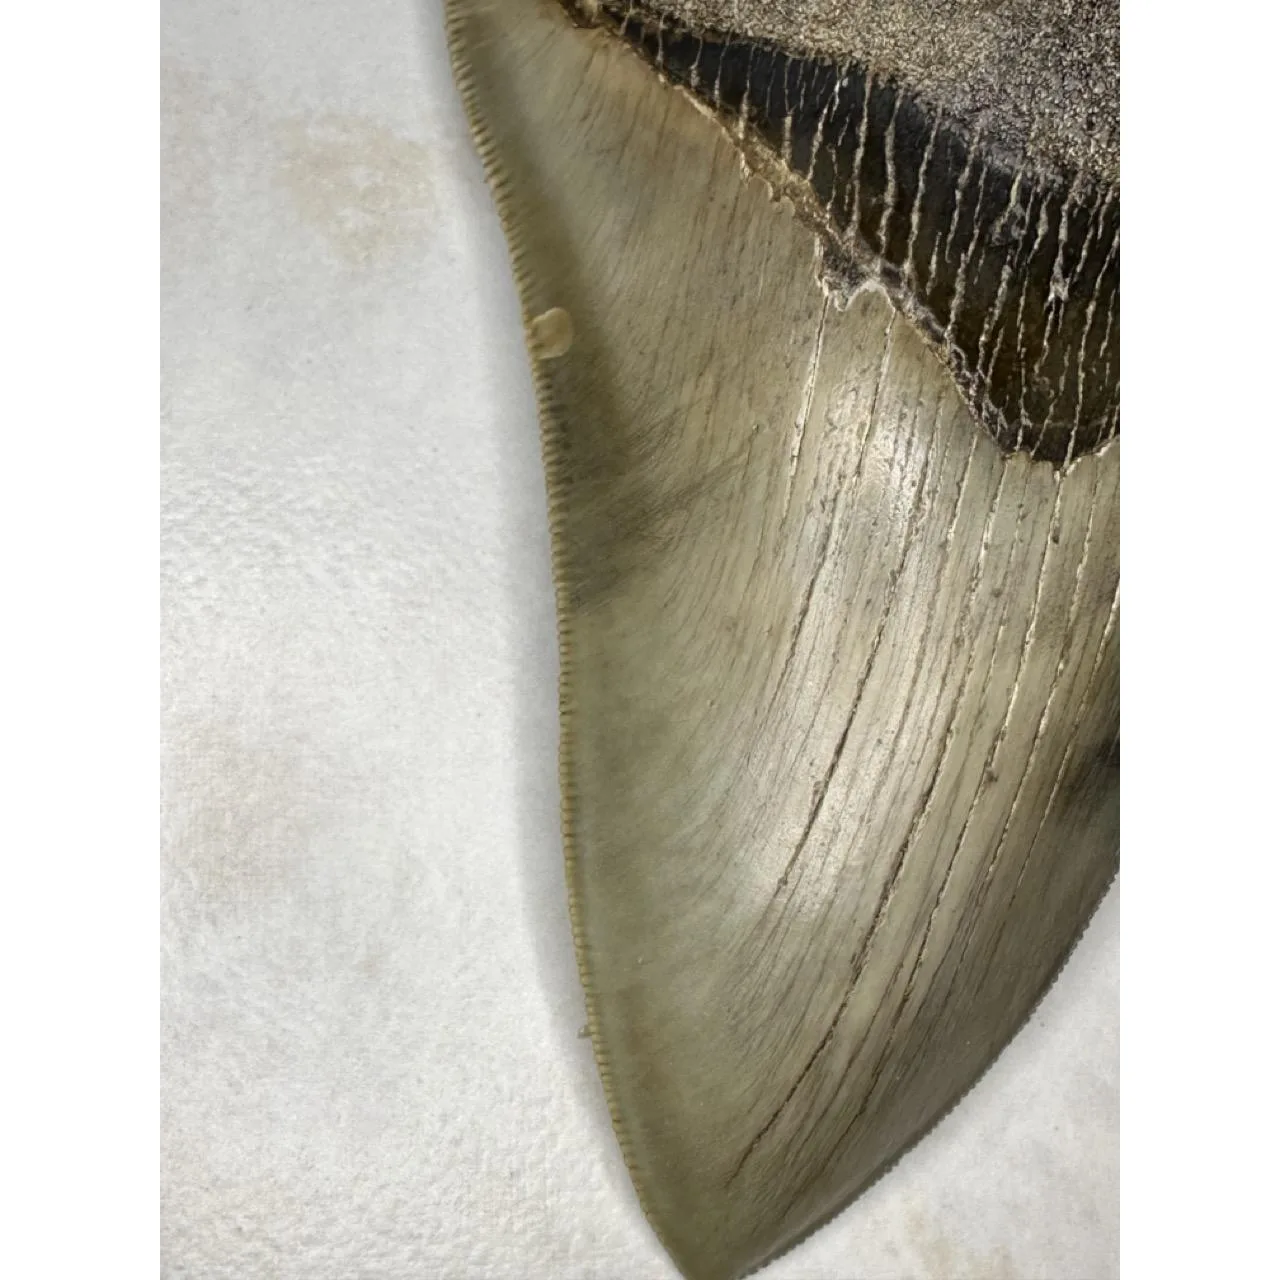 Megalodon Tooth, S. Georgia 4.90 inch Prehistoric Online